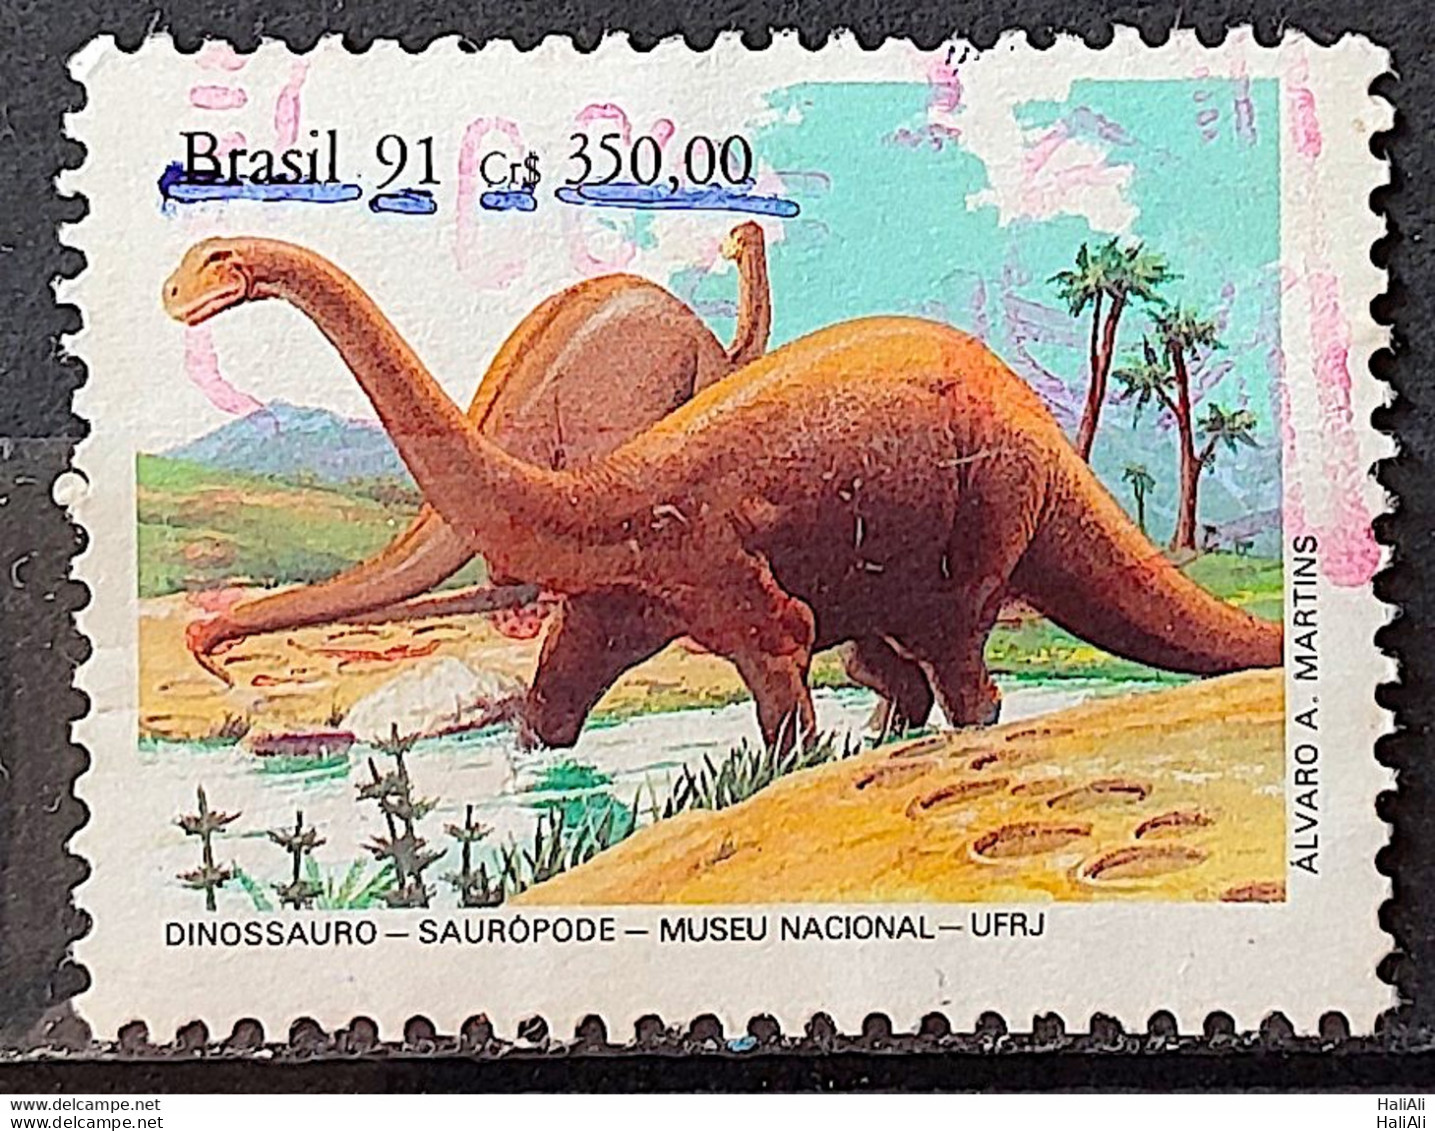 C 1740 Brazil Stamp National Museum Dinosaur Sauropode 1991 Circulated 3 - Used Stamps